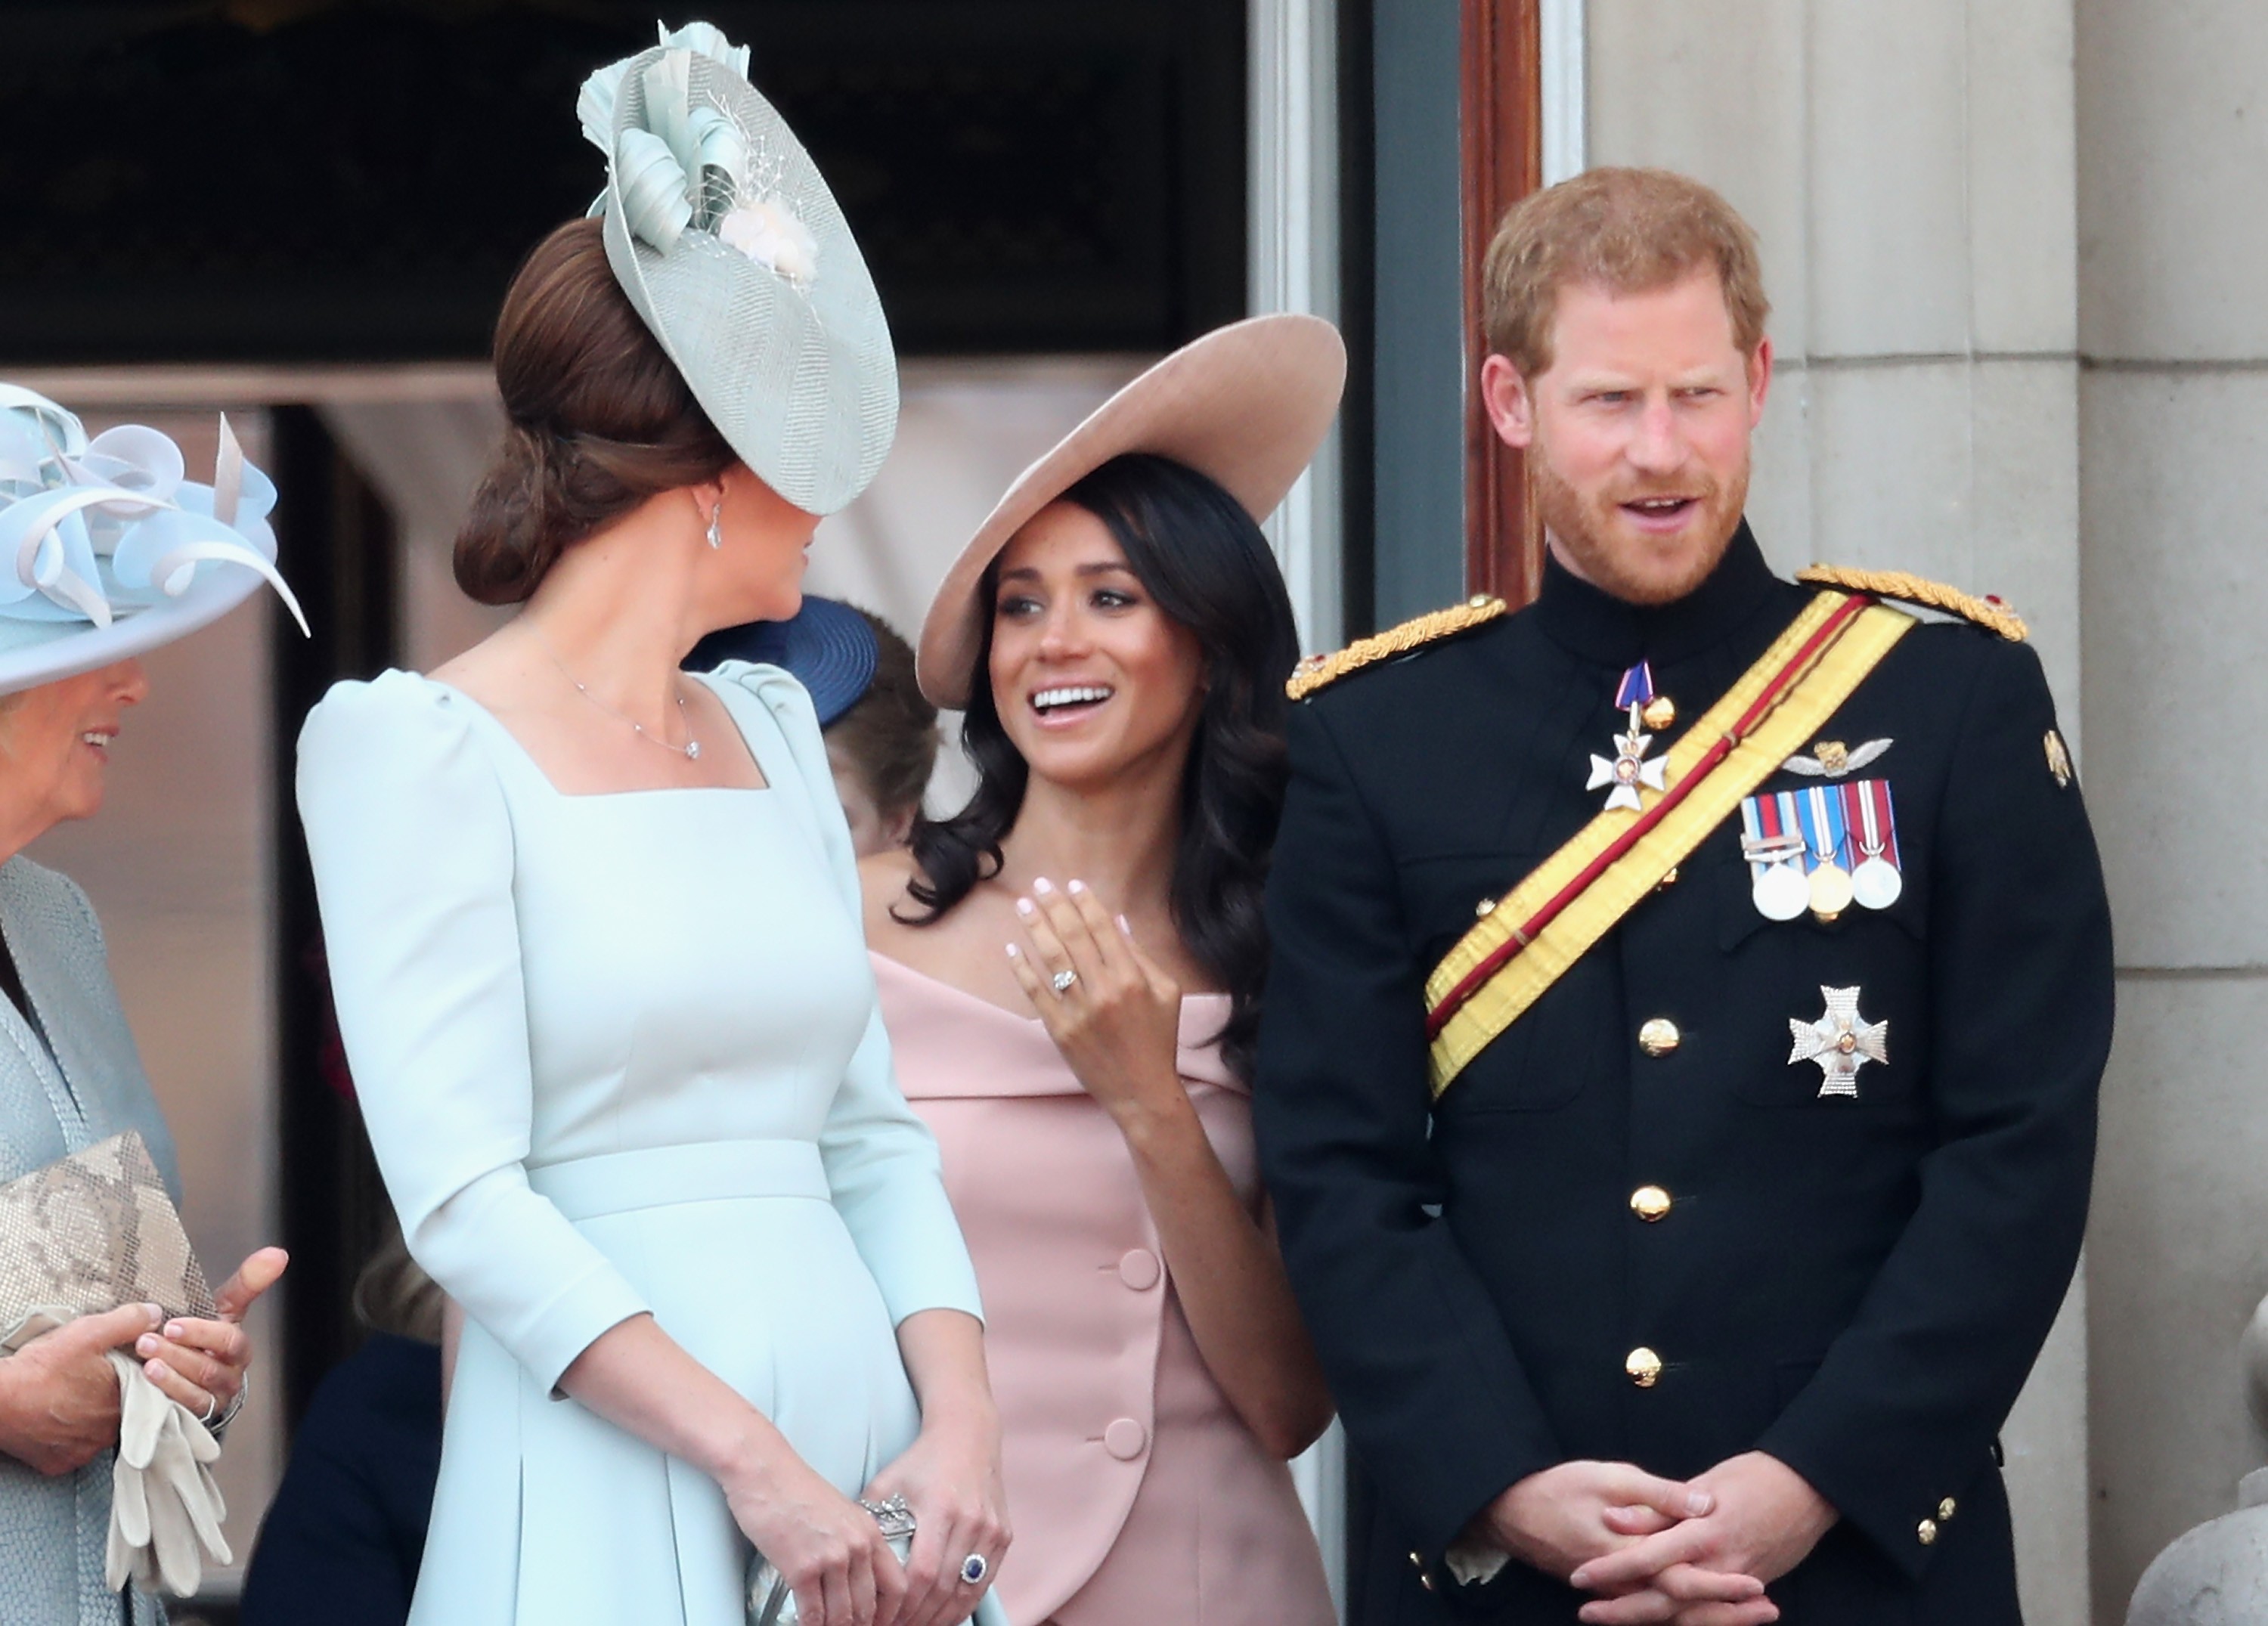 LONDON, ENGLAND - JUNE 09:  Camilla, Duchess Of Cornwall, Catherine, Duchess of Cambridge, Meghan, Duchess of Sussex, Prince Harry, Duke of Sussex on the balcony of Buckingham Palace during Trooping The Colour on June 9, 2018 in London, England. The annua (Foto: Getty Images)